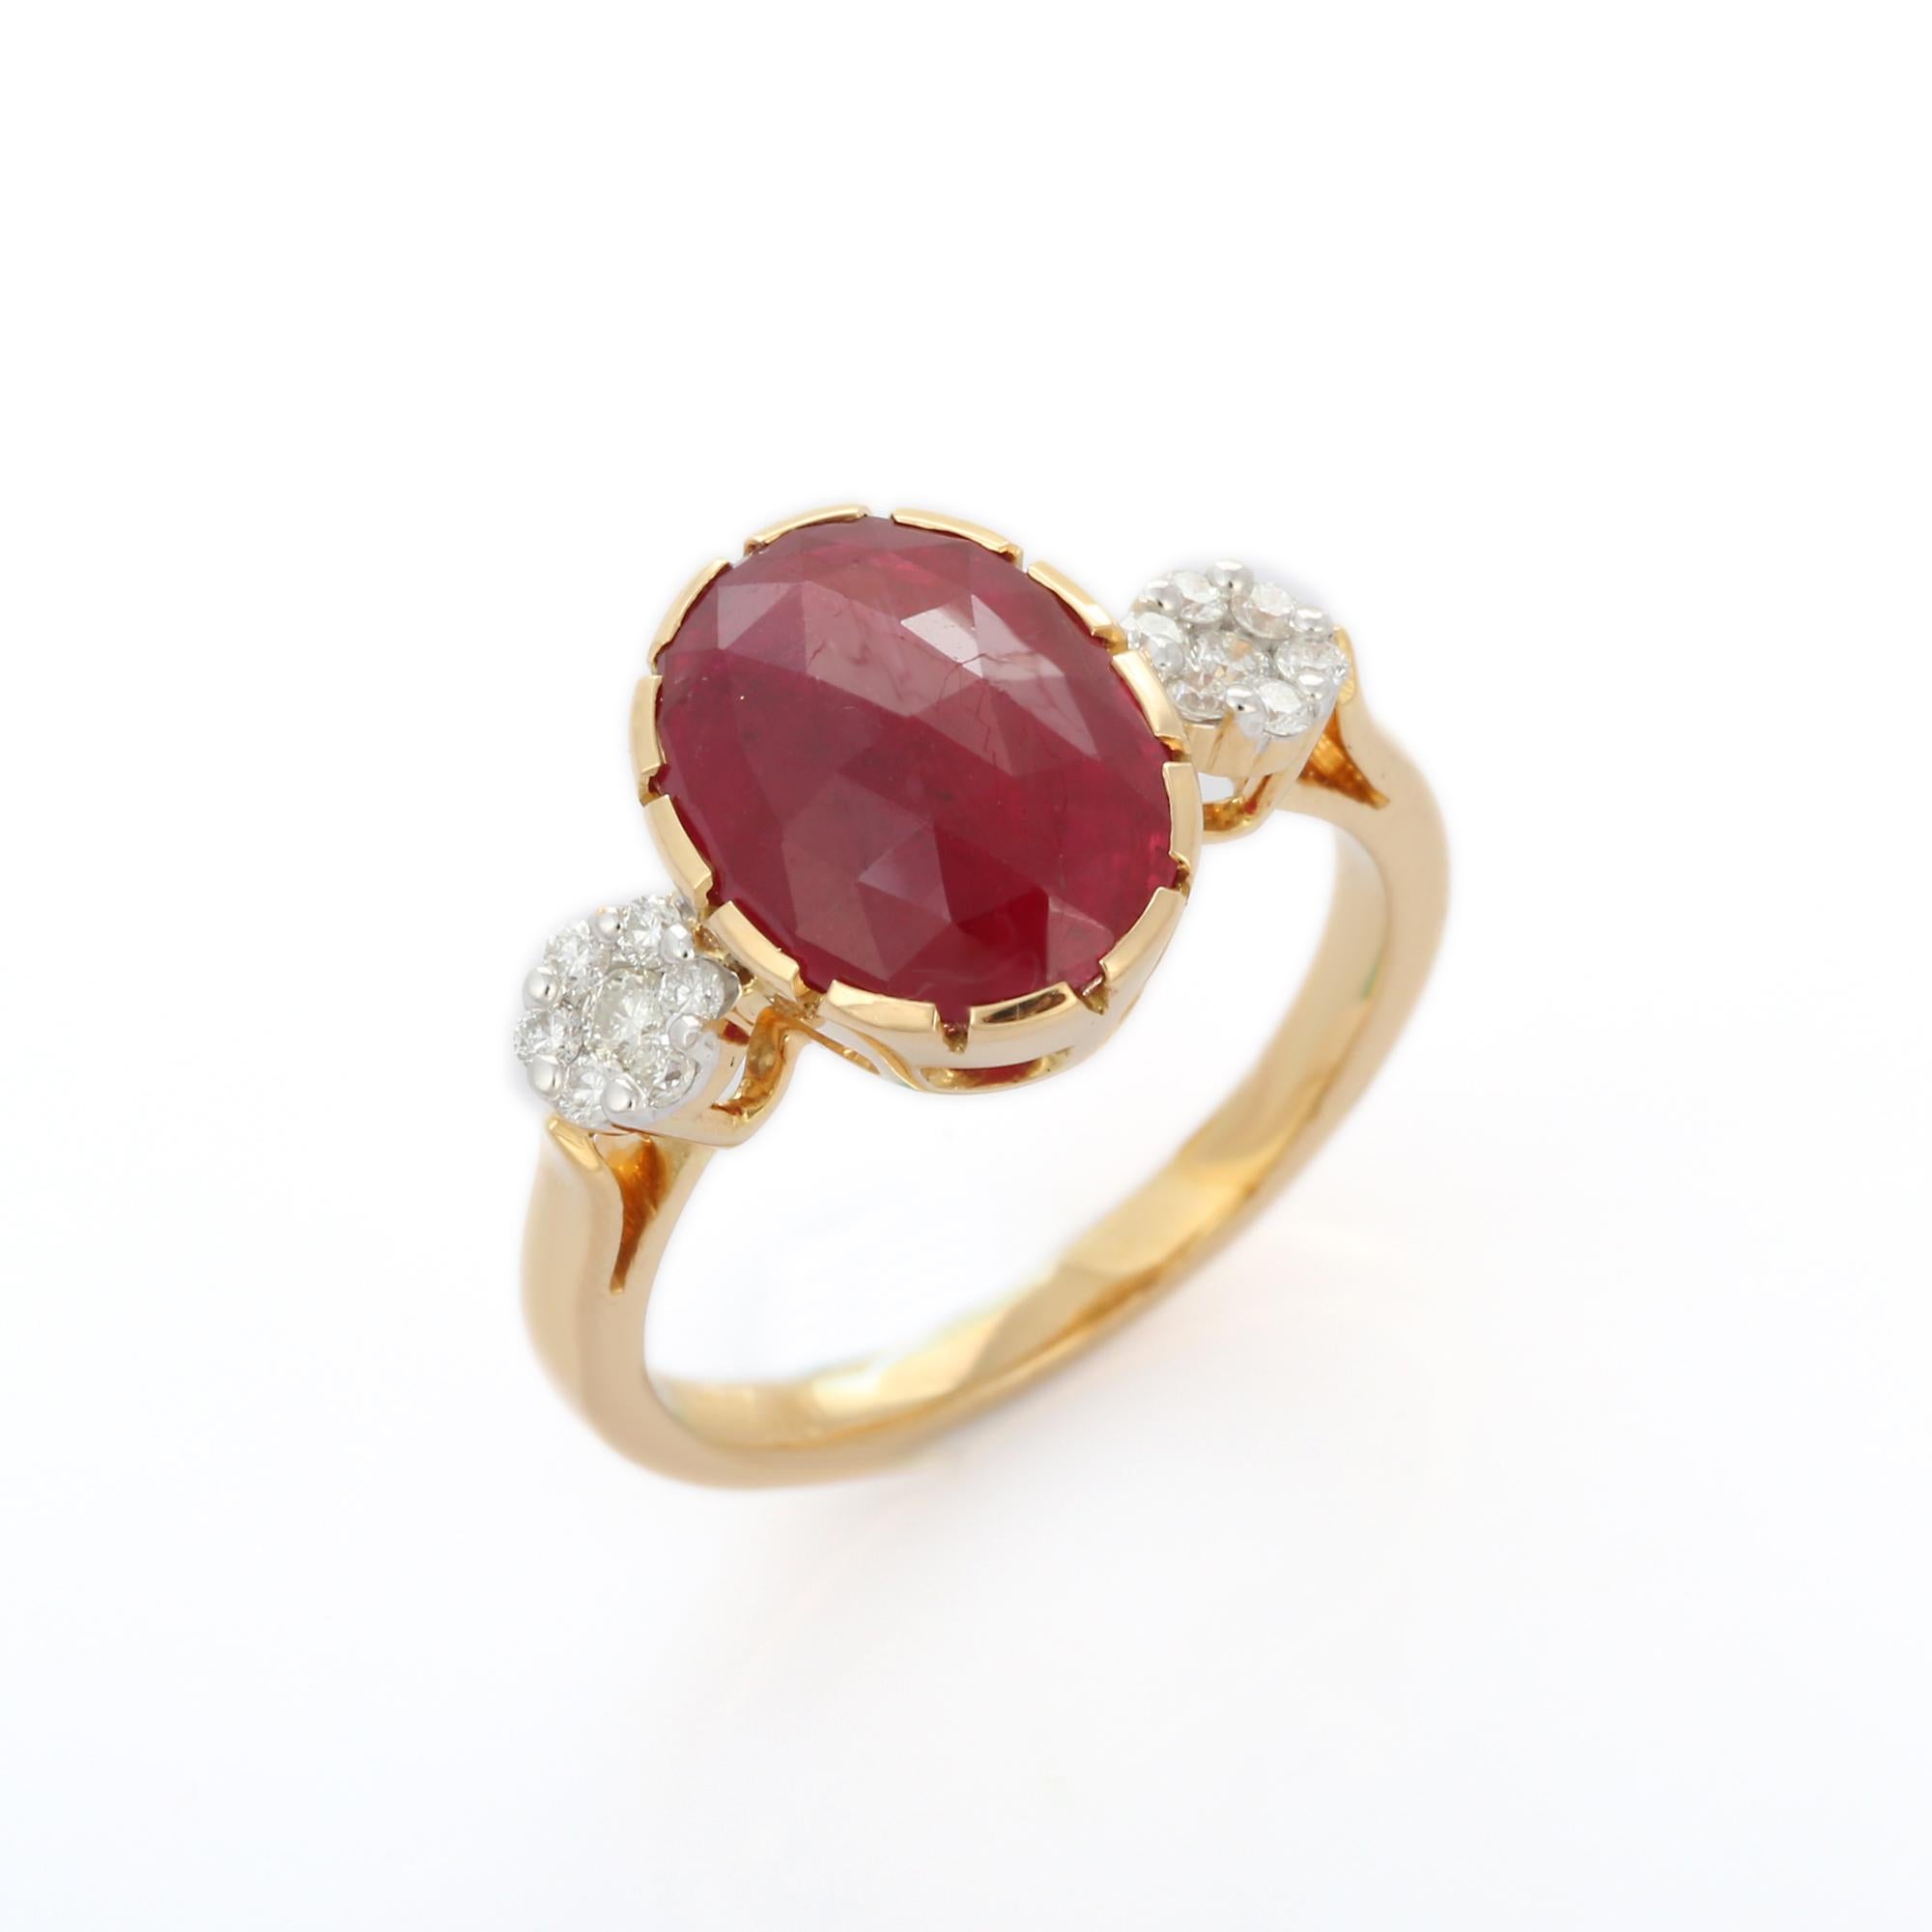 For Sale:  2.92 Carat Red Ruby and Diamond Engagement Ring in 18K Yellow Gold  7